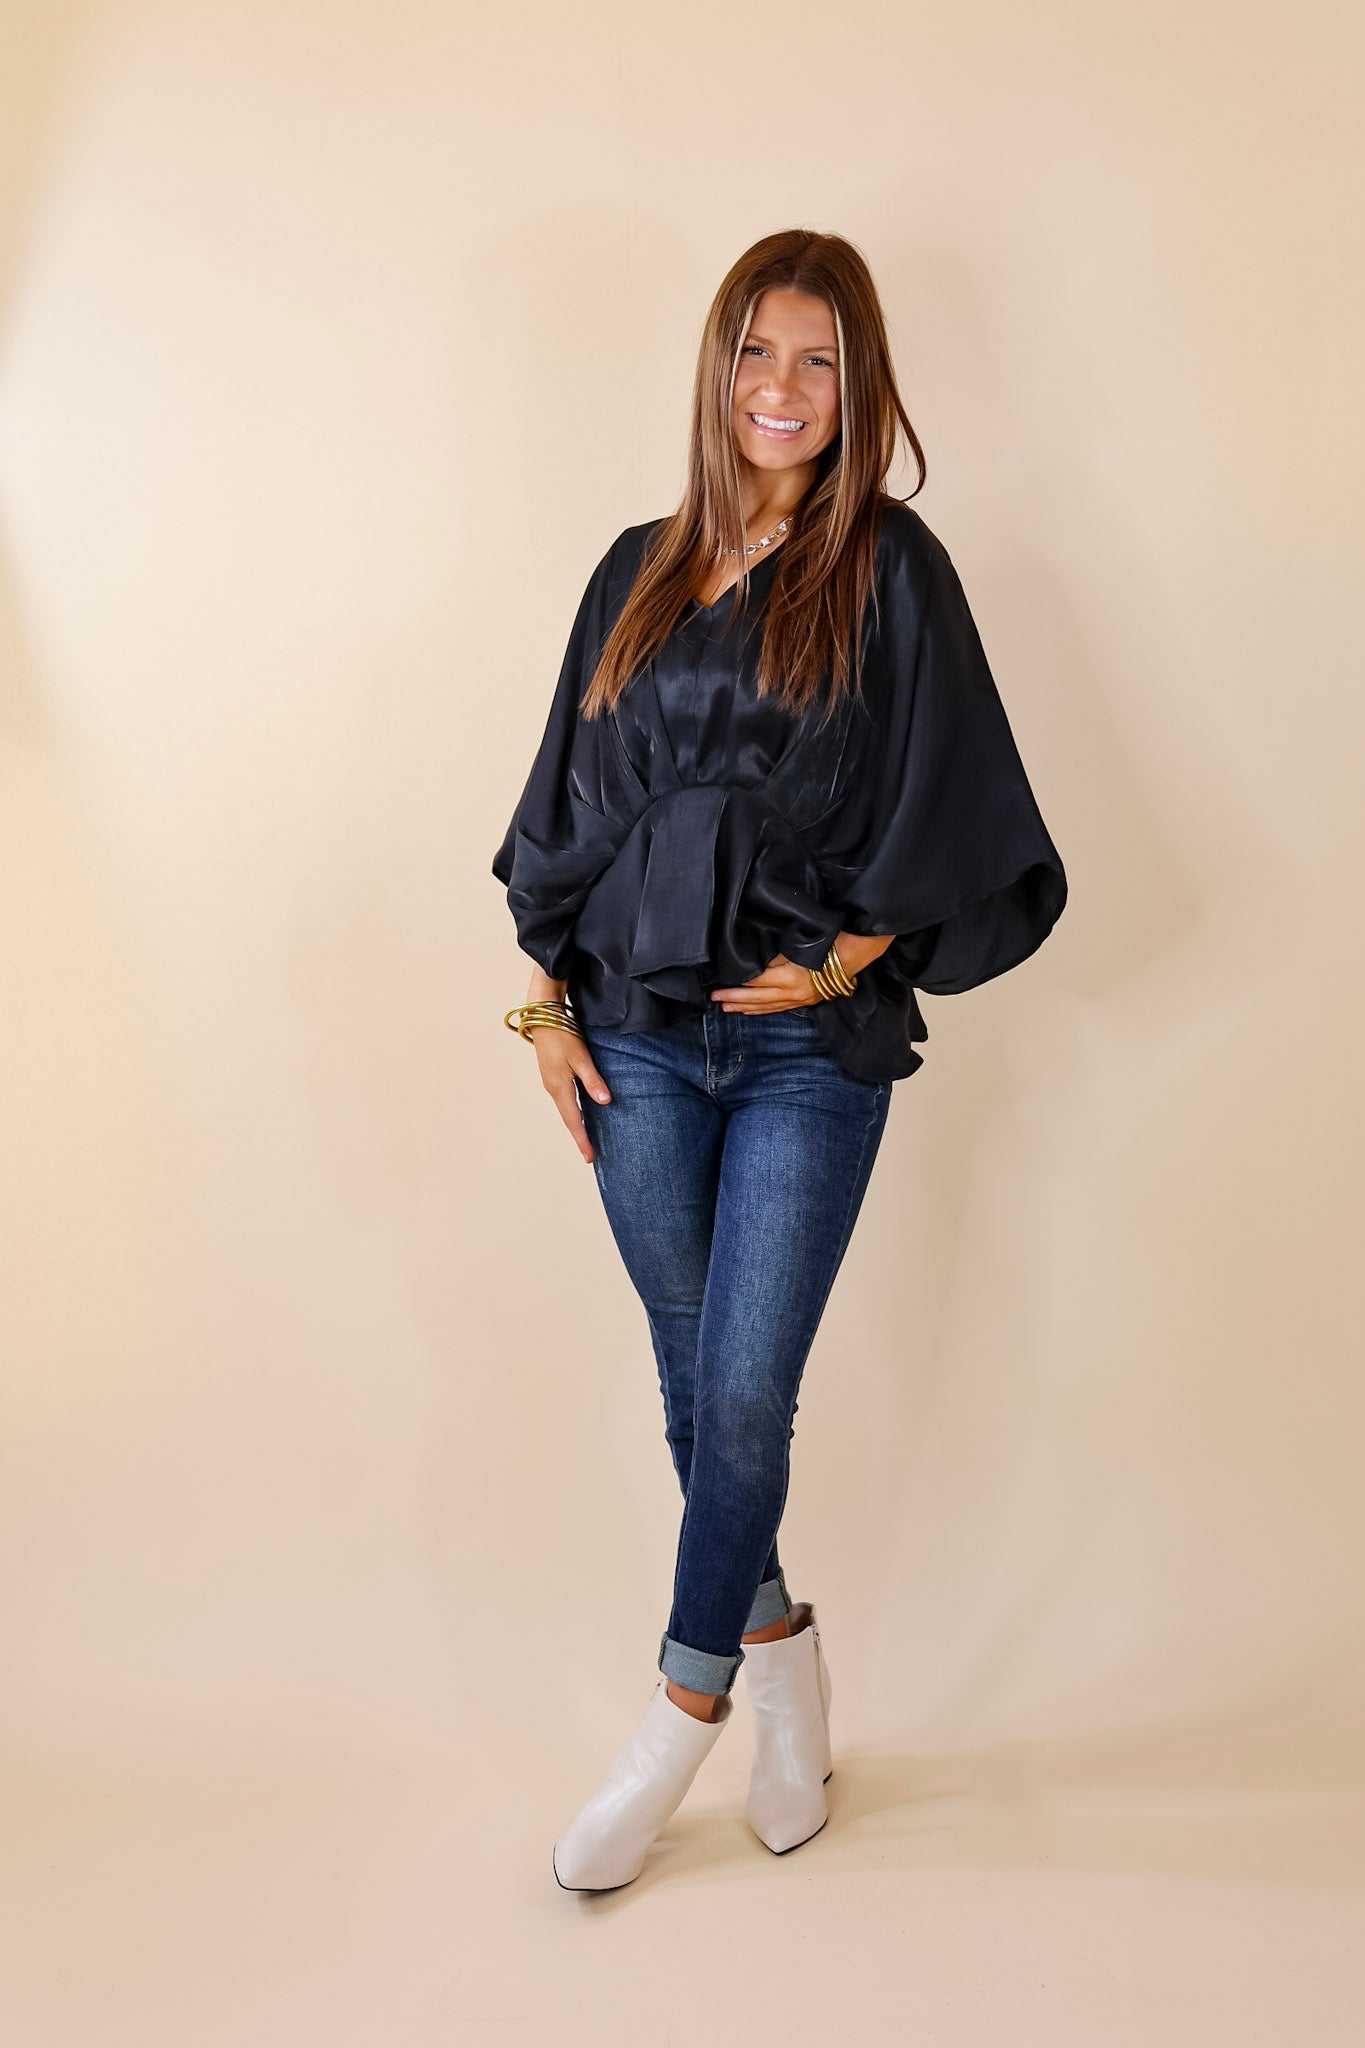 Hear the Music Drop Sleeve Satin V Neck Peplum Top in Shiny Black - Giddy Up Glamour Boutique